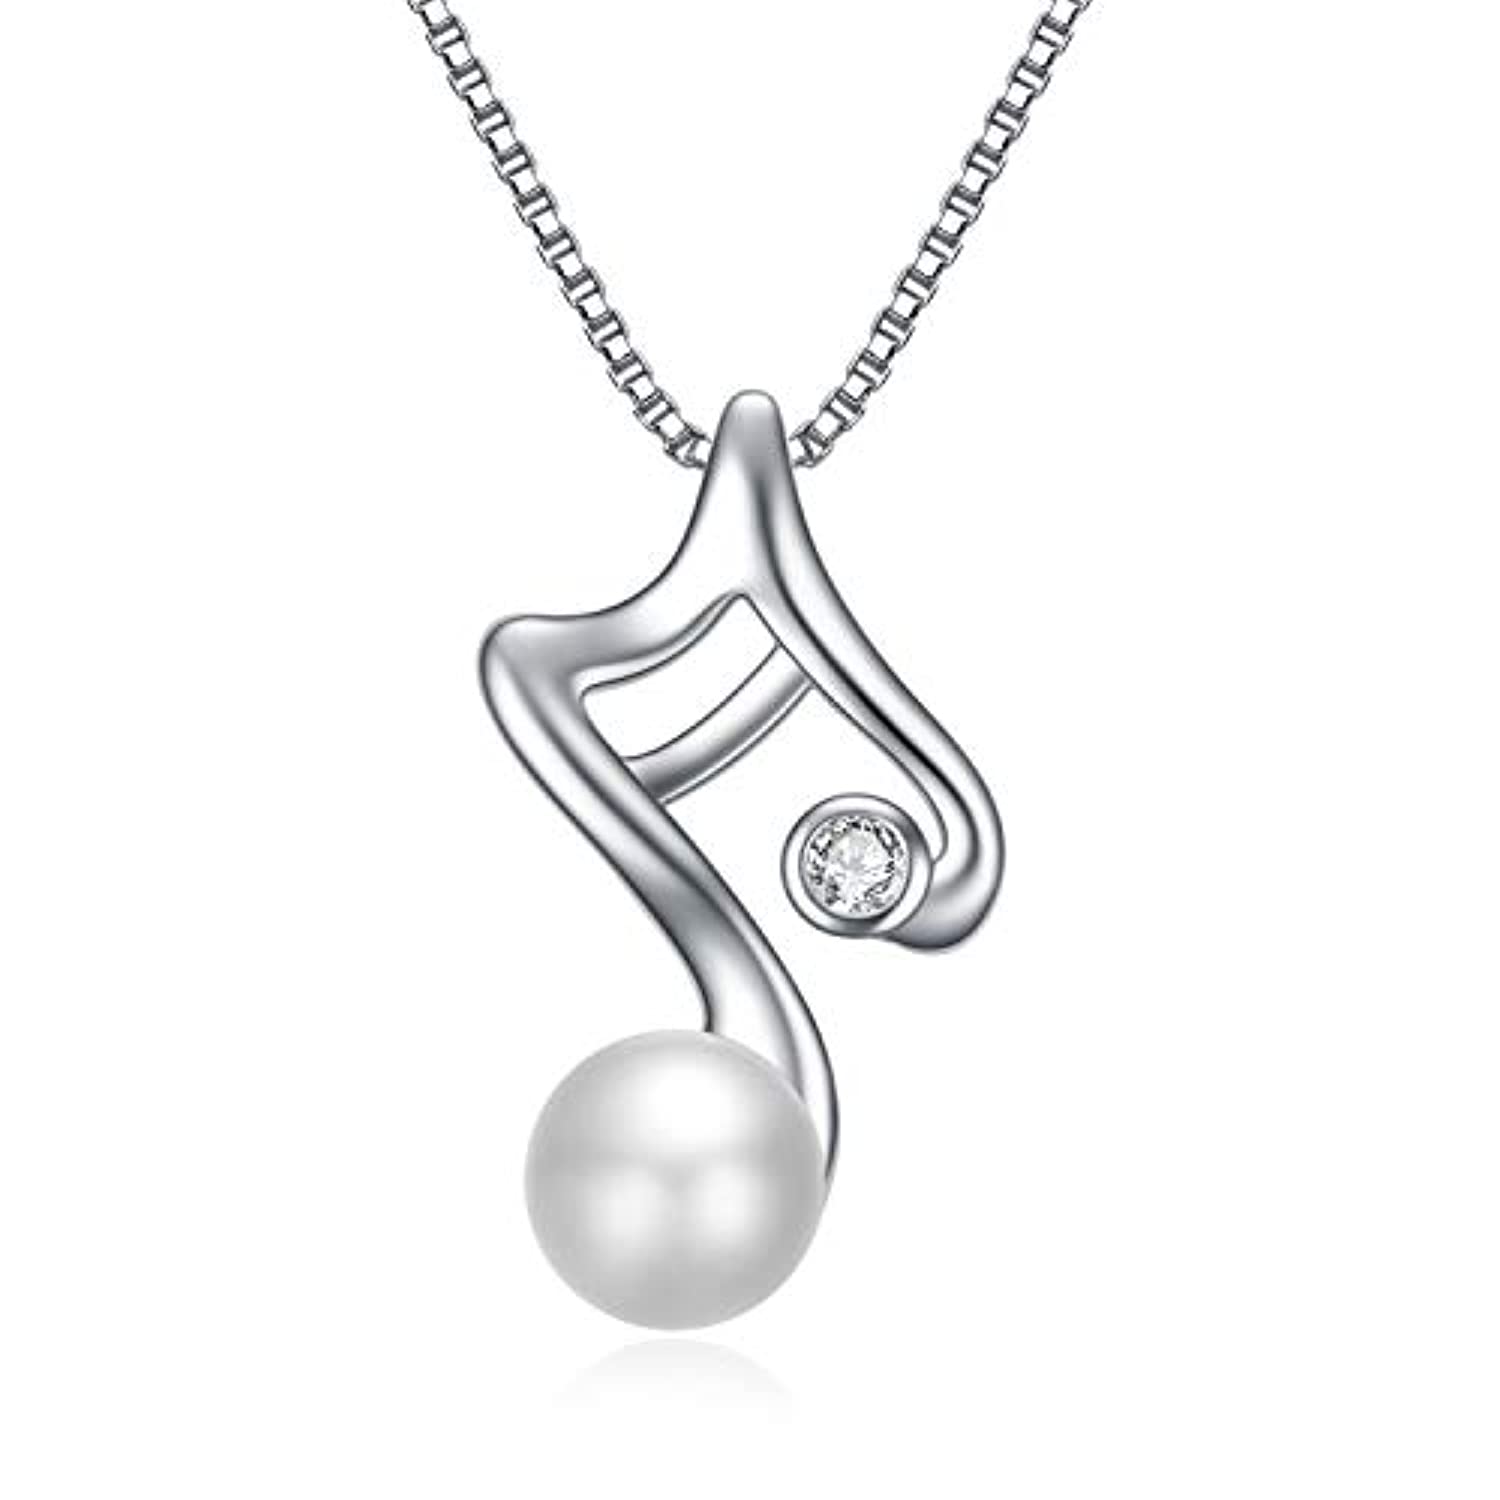 Tiny Music Note Necklace on Silver Chain - The Shop at Strathmore